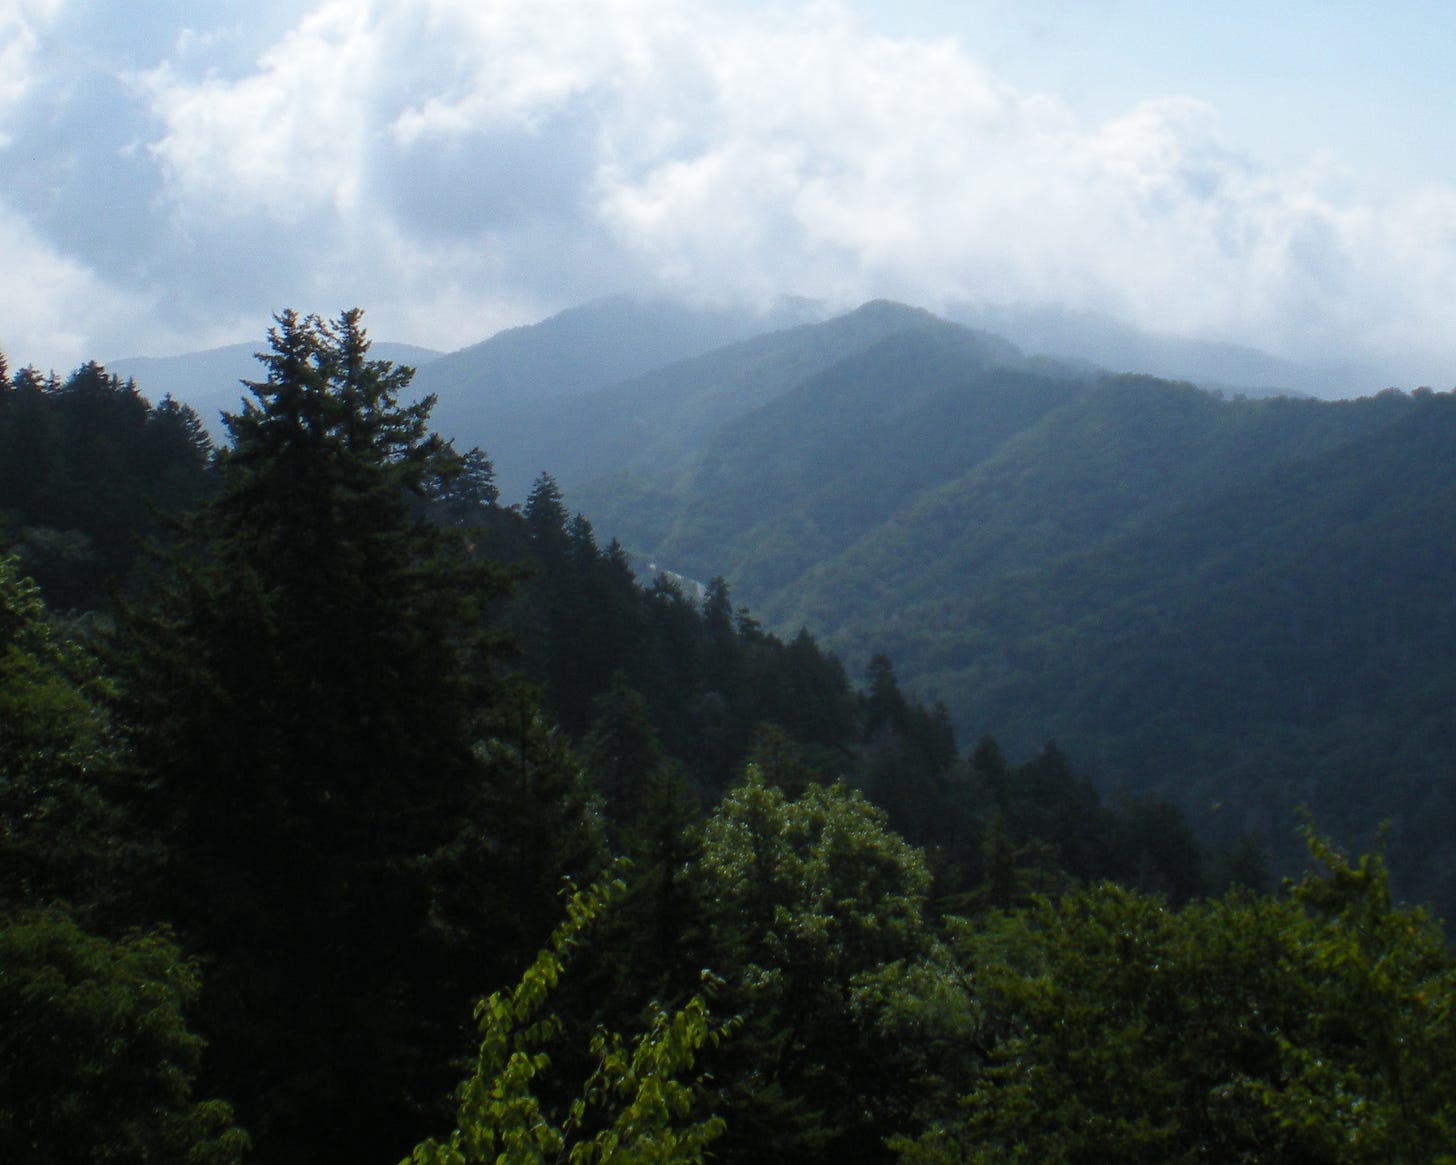 Vista over long forested mountain ridge with low clouds.